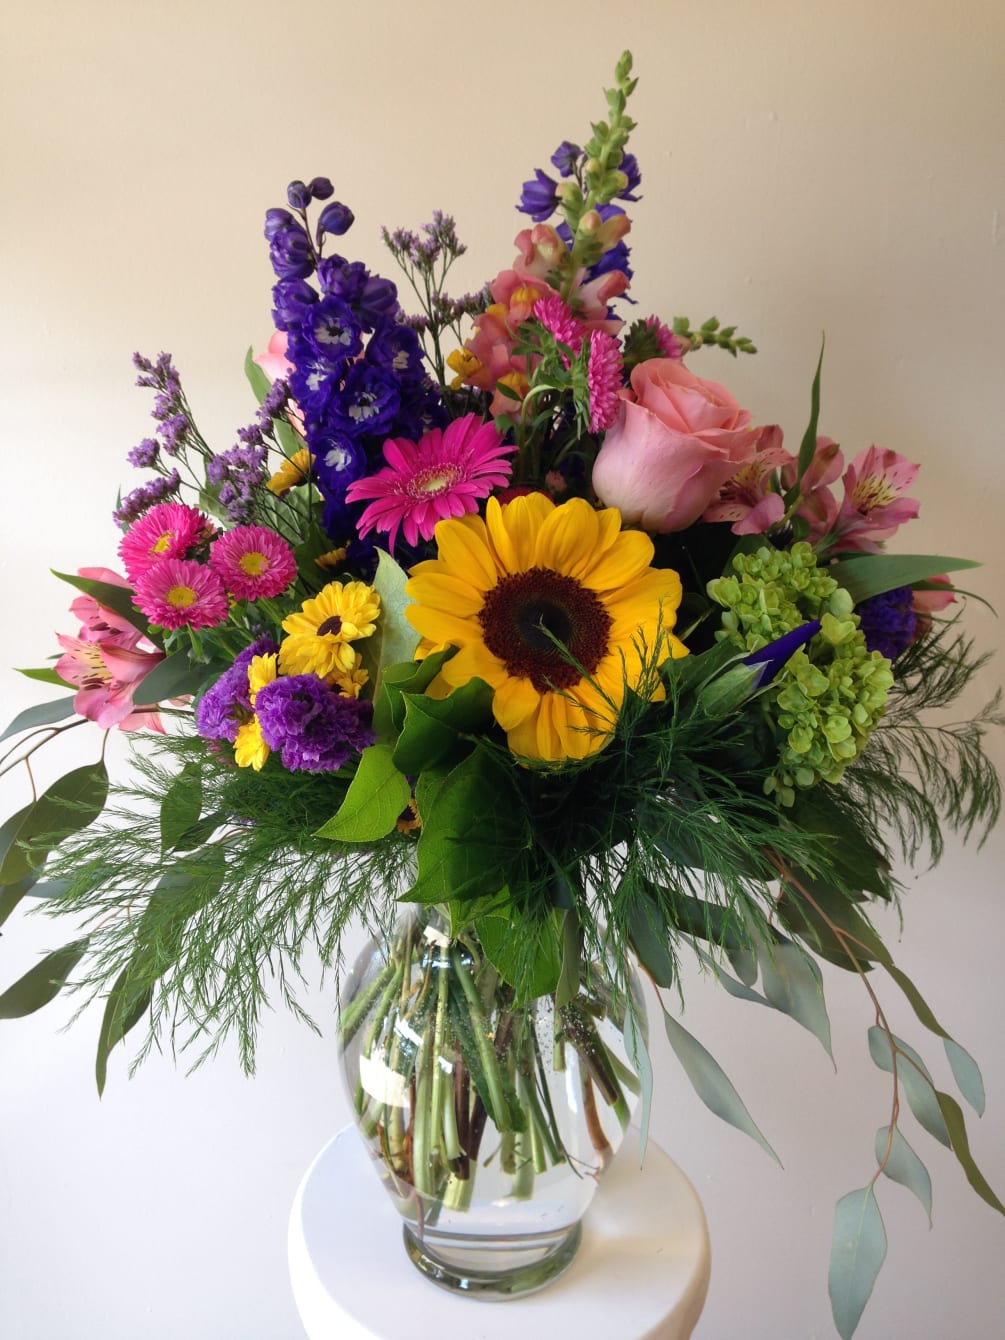 This beautiful vase arrangement filled with a colorful assortment
blossoms will make anyone